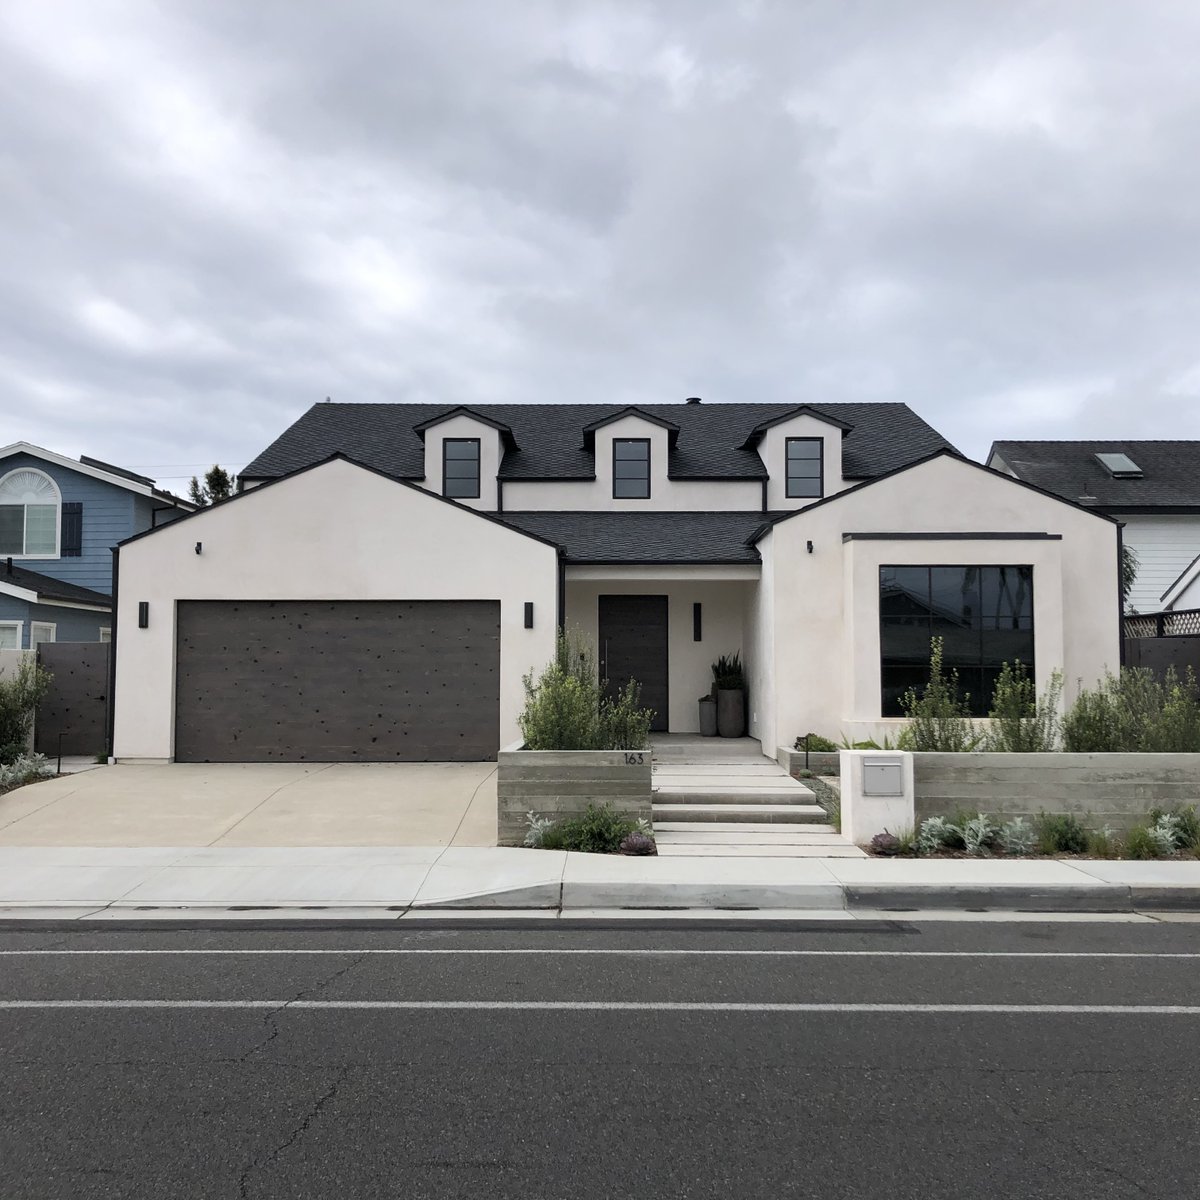 Another beautifully completed custom home! This one was designed by Mark Scheurer Architects and is located in Costa Mesa, CA. 
#engineers #engineering #engineer #structural #building #builders #construction #newhome #customhome #homes #orangecountyhomes #design #architects